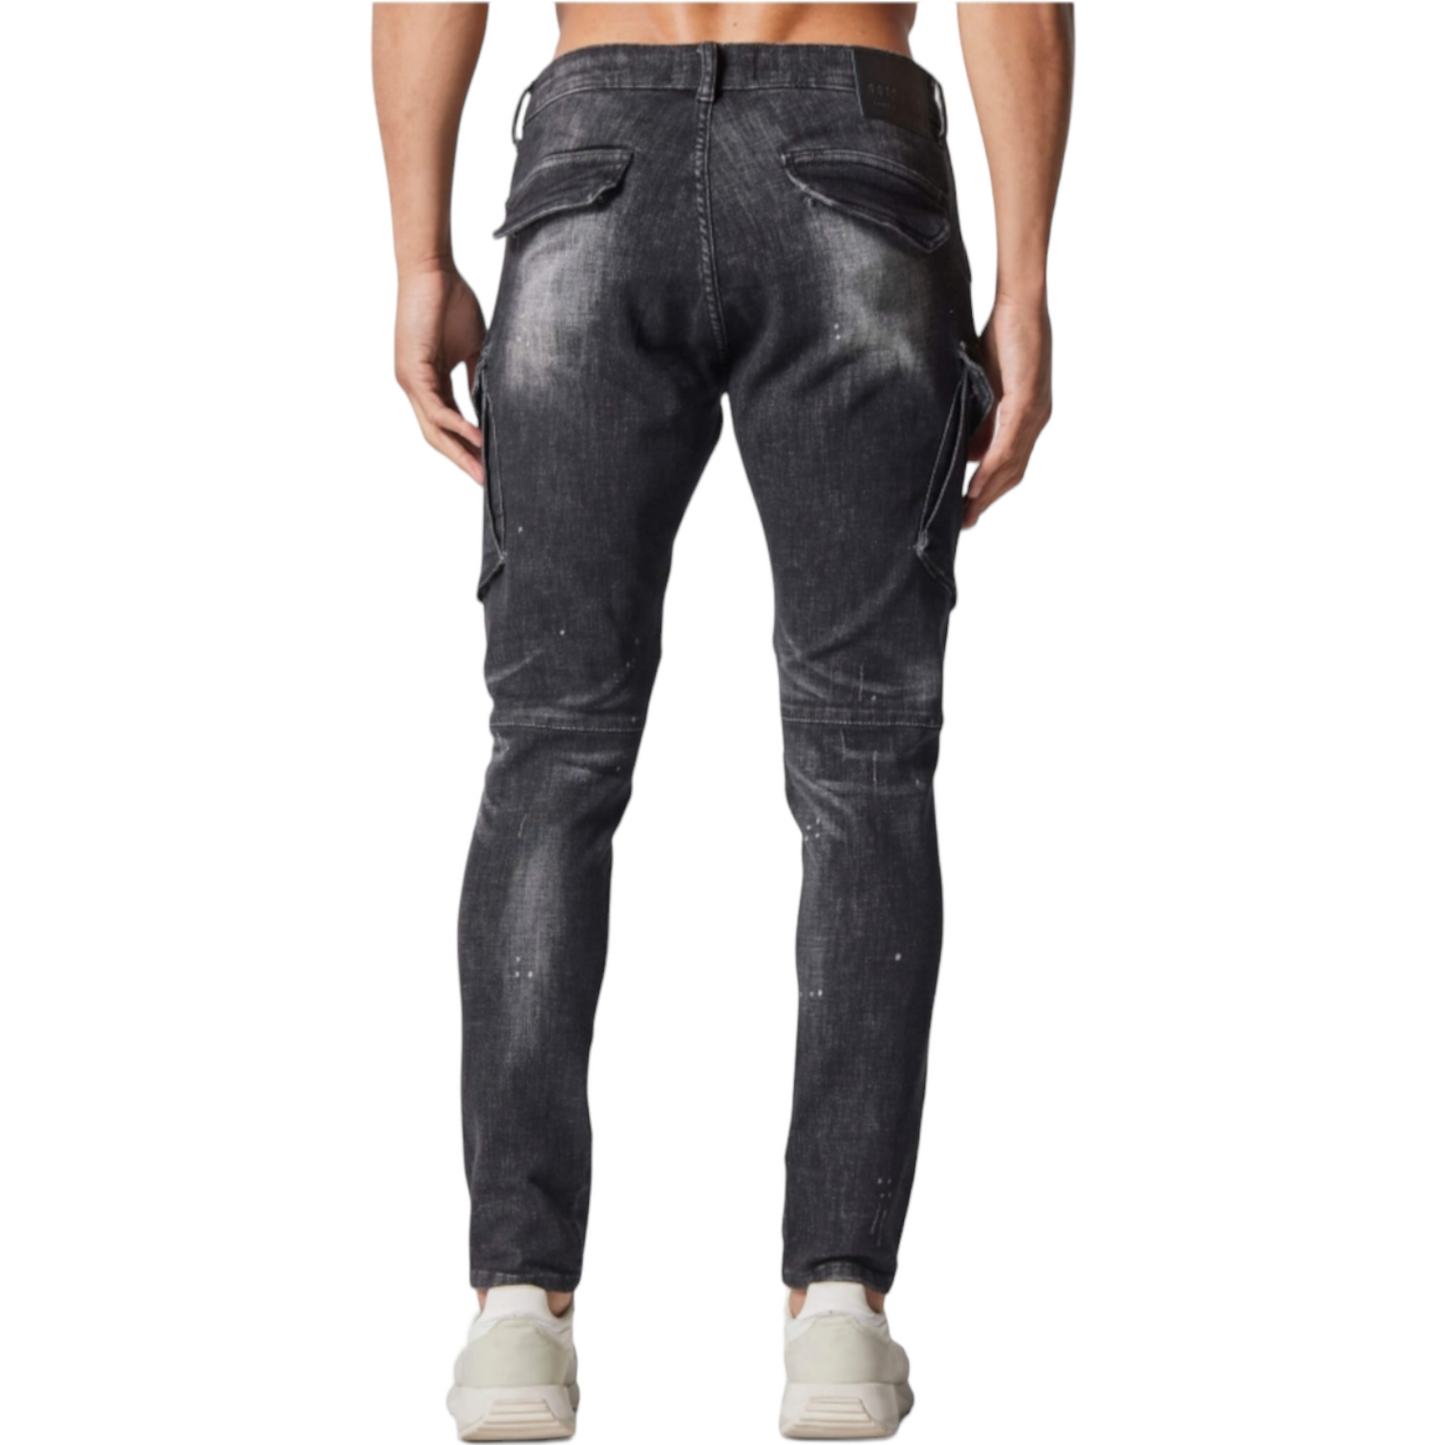 Police Major KYLE 926 Tapered Fit Jeans